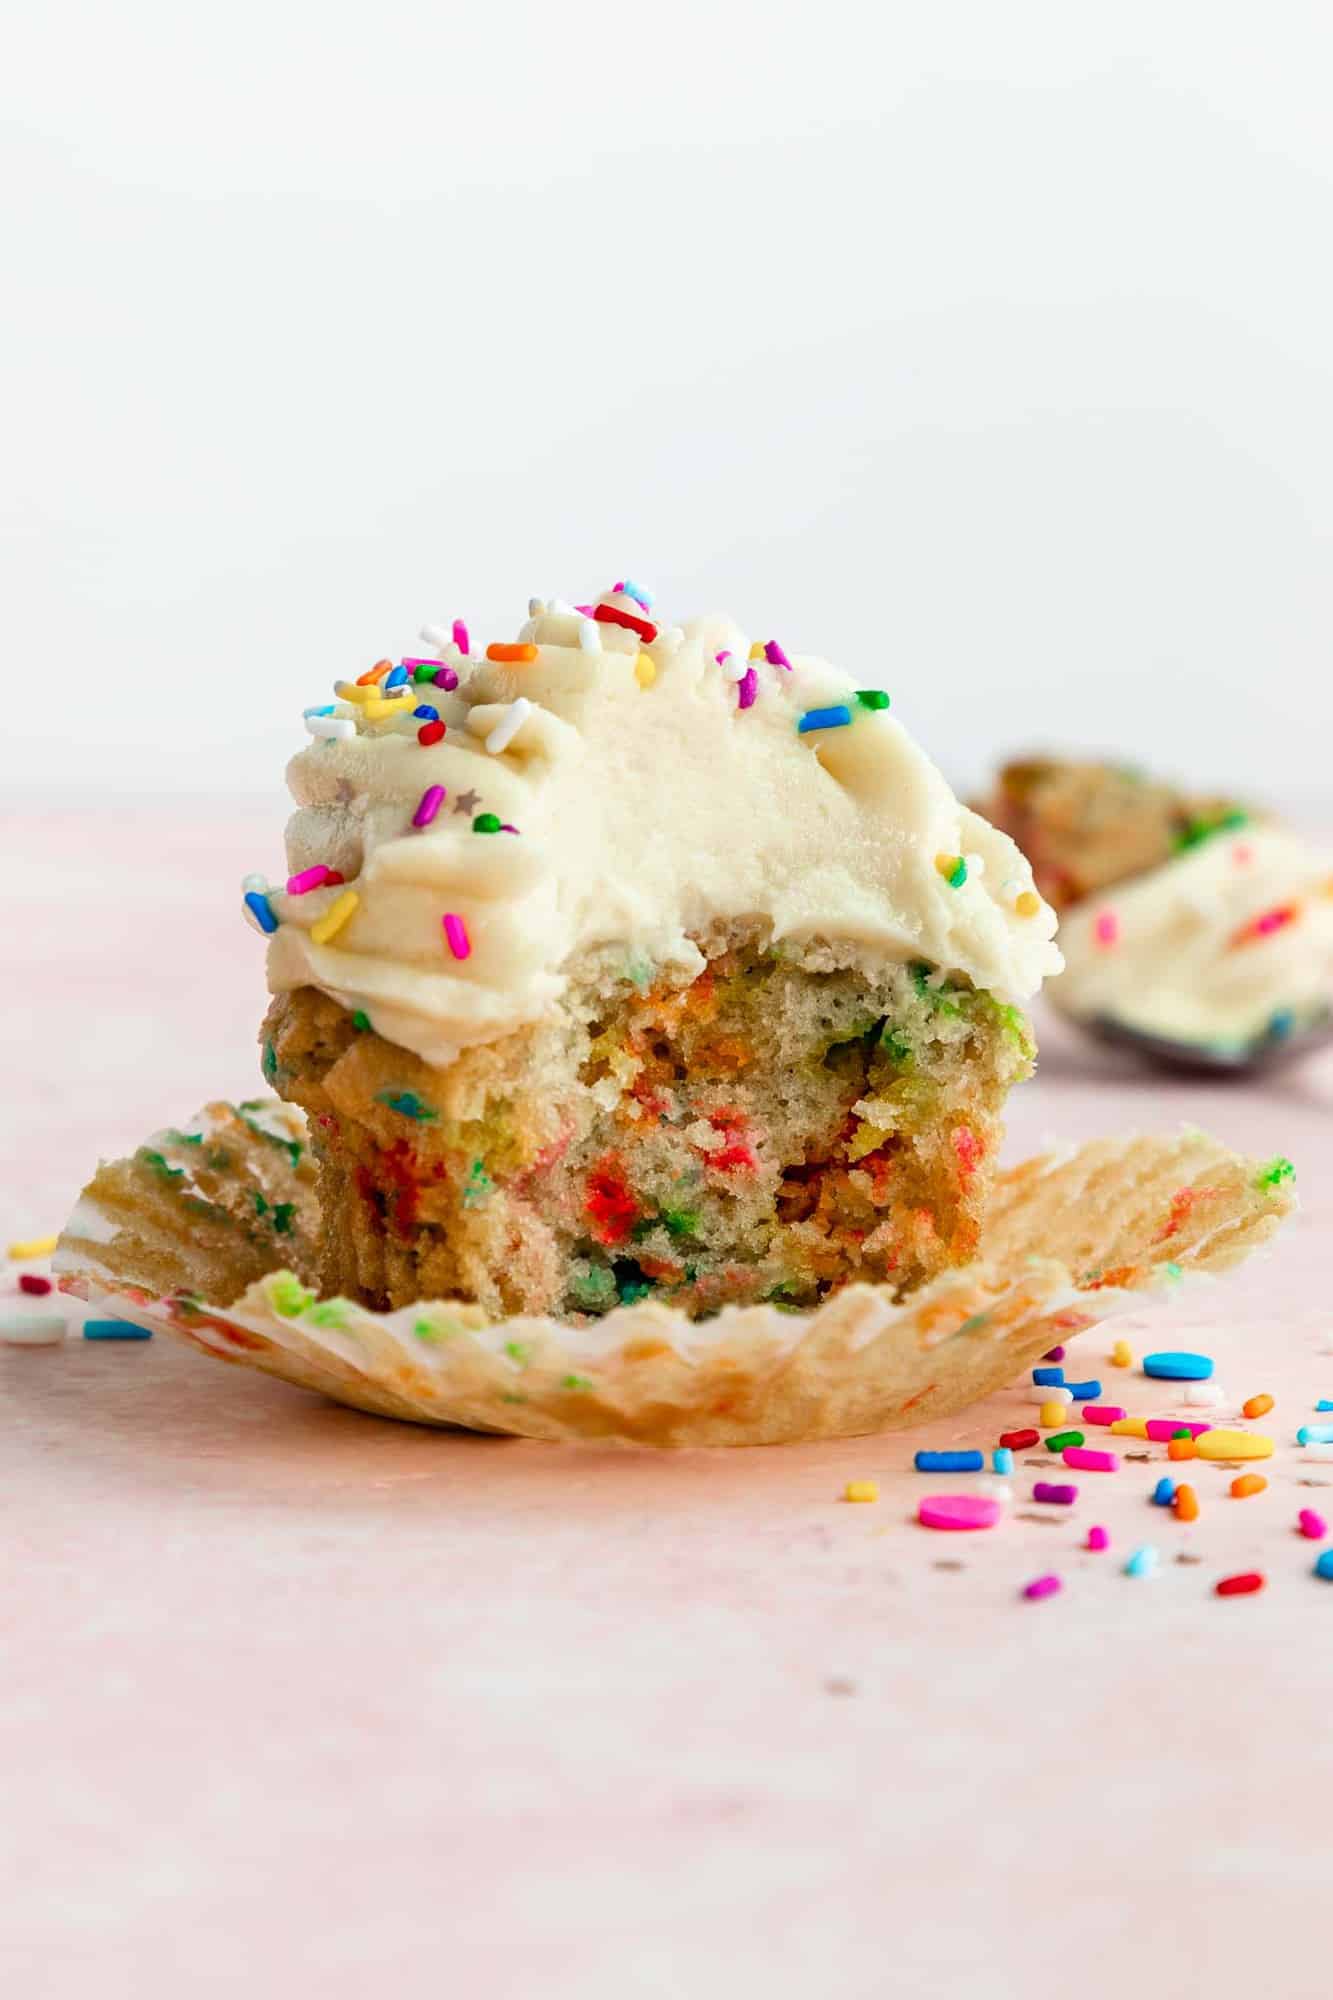 a partially eaten vegan funfetti cupcake topped with vanilla buttercream frosting and rainbow sprinkles